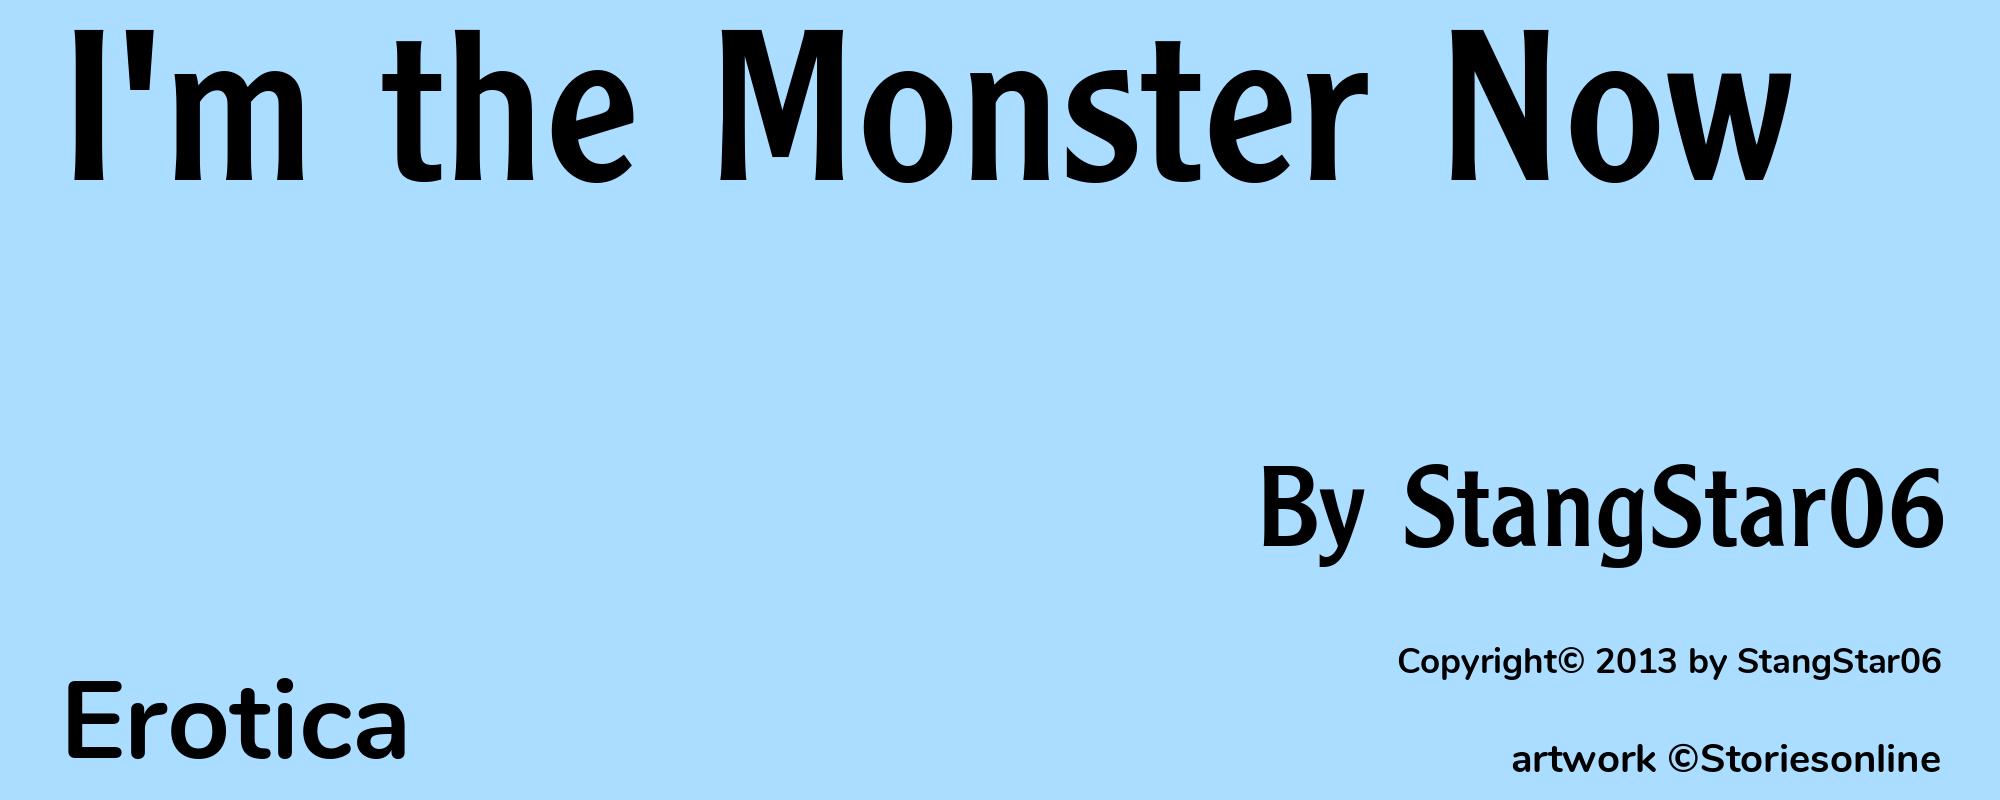 I'm the Monster Now - Cover